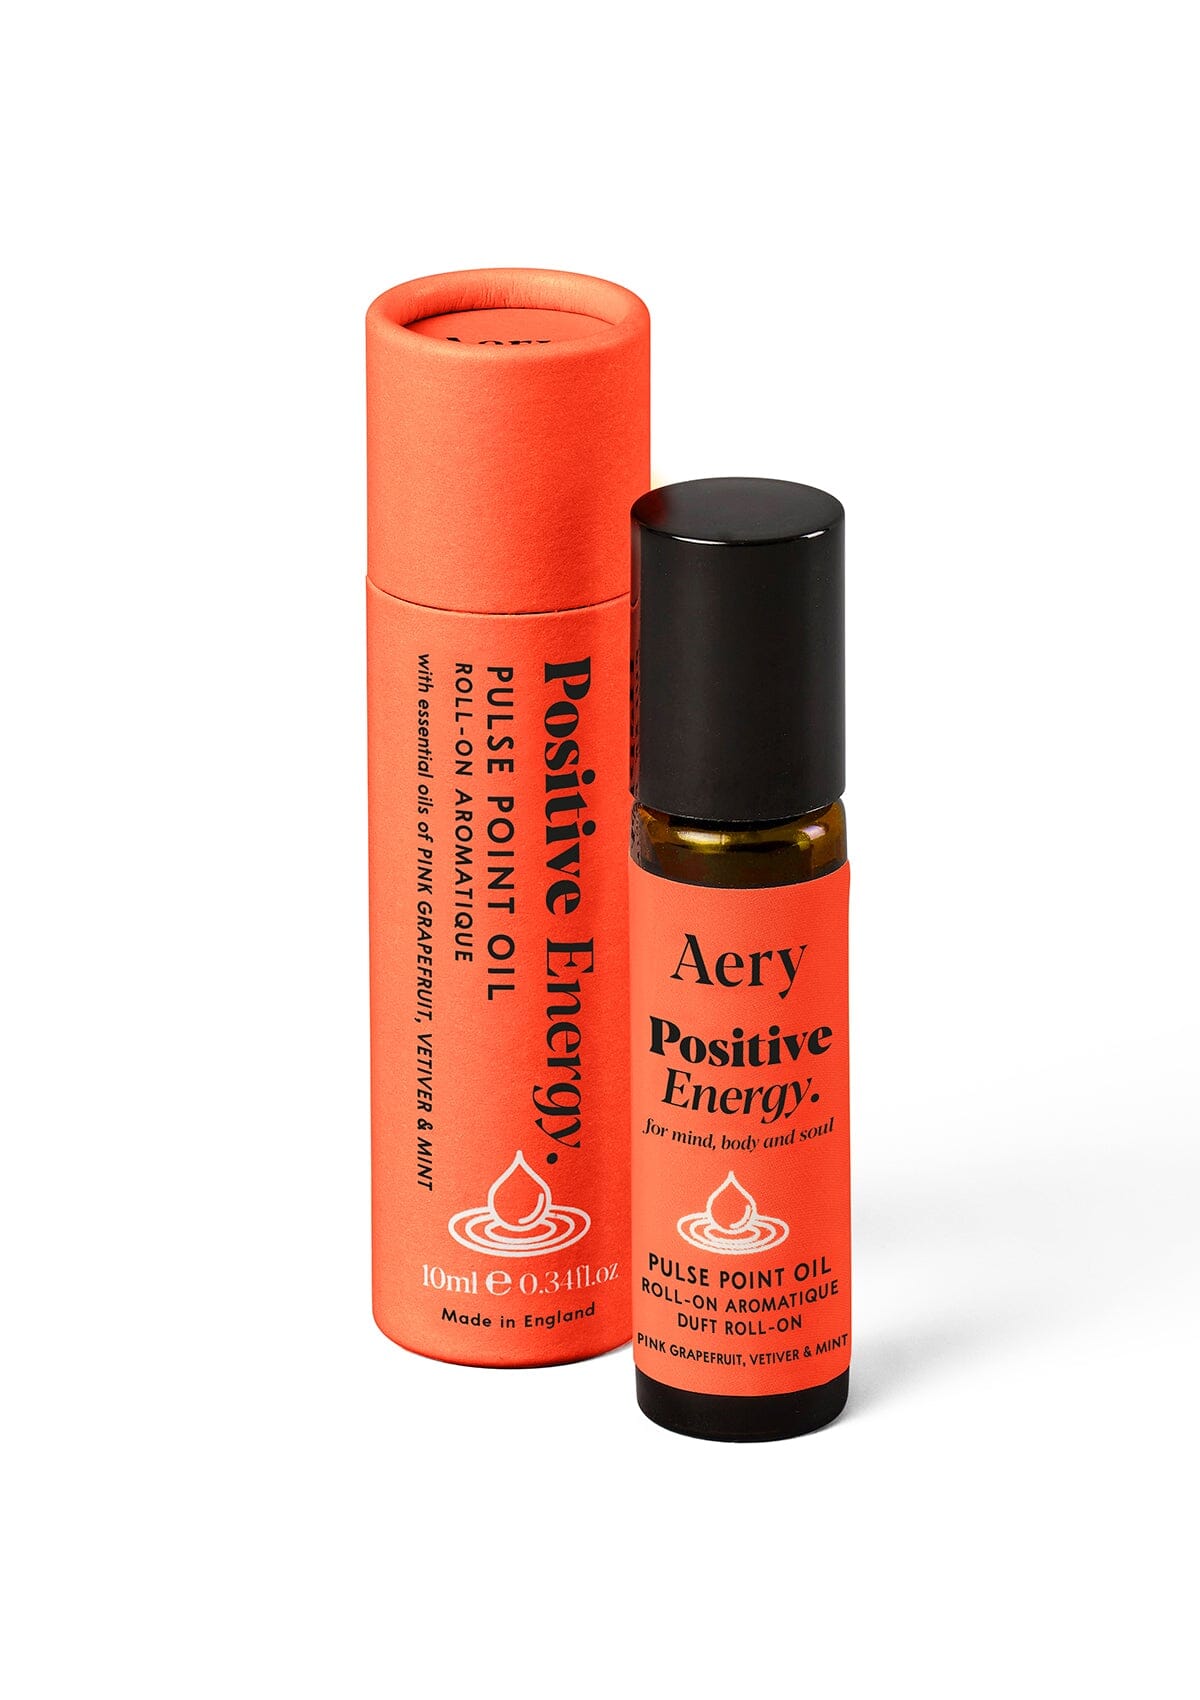 Orange Positive Energy Pulse Point Oil displayed next to product packaging by Aery on white background 